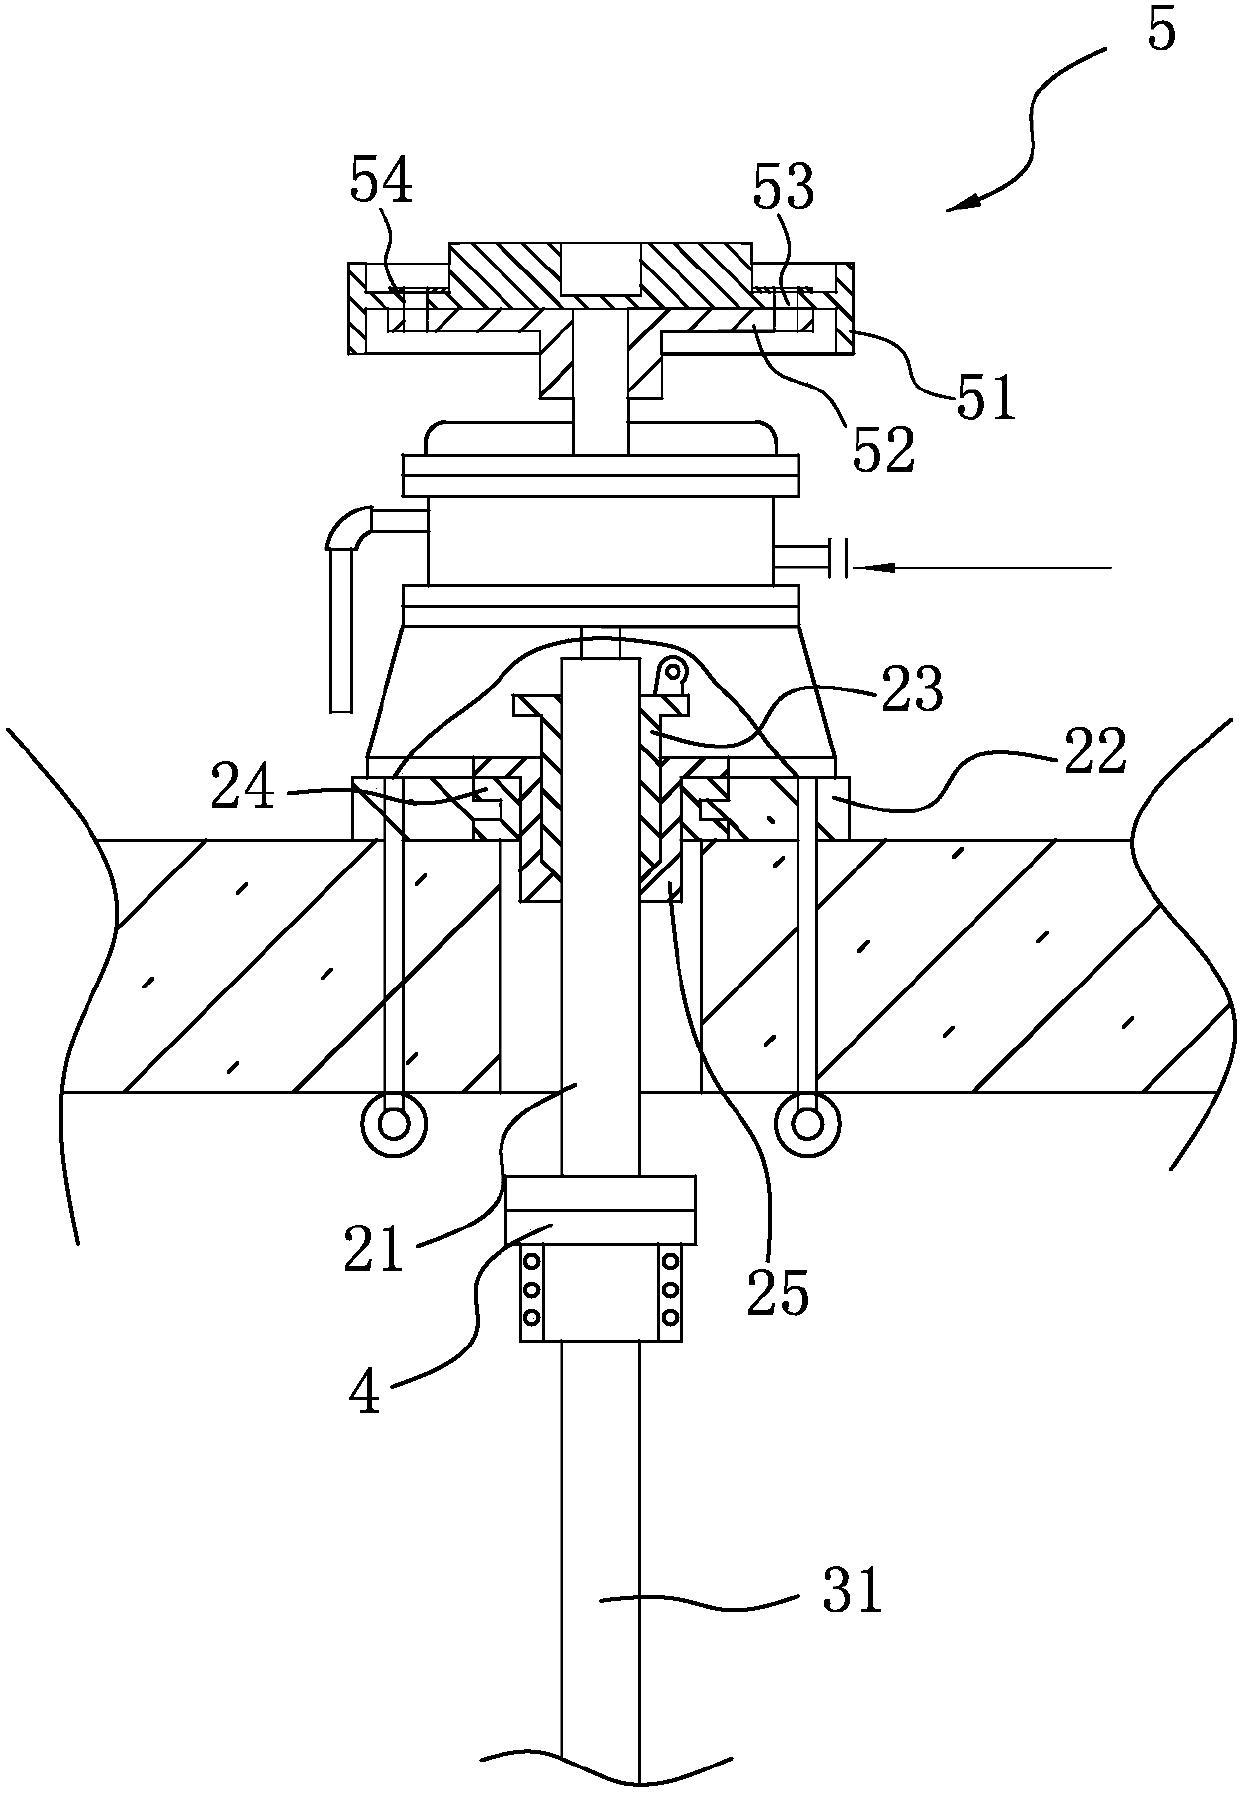 A dual-purpose three-stage water turbine pump for pumping hydropower generation and its installation method